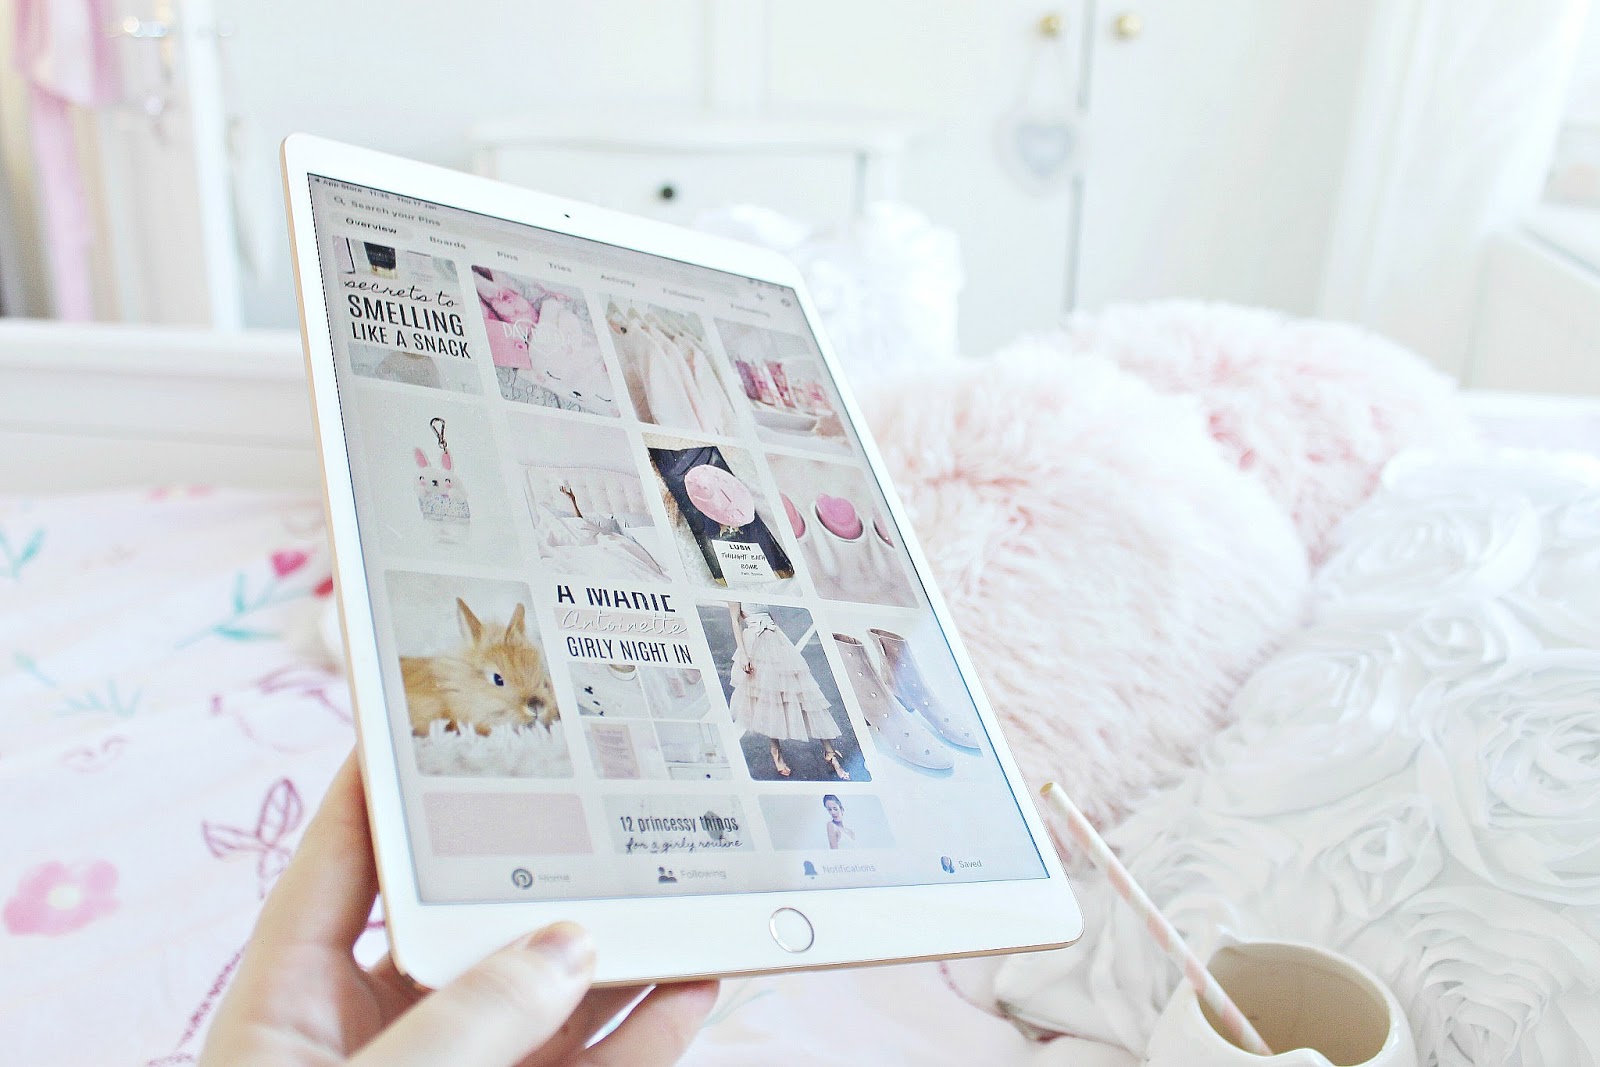 Girly lazy day ideas, how to spend your day off and make your day off last longer